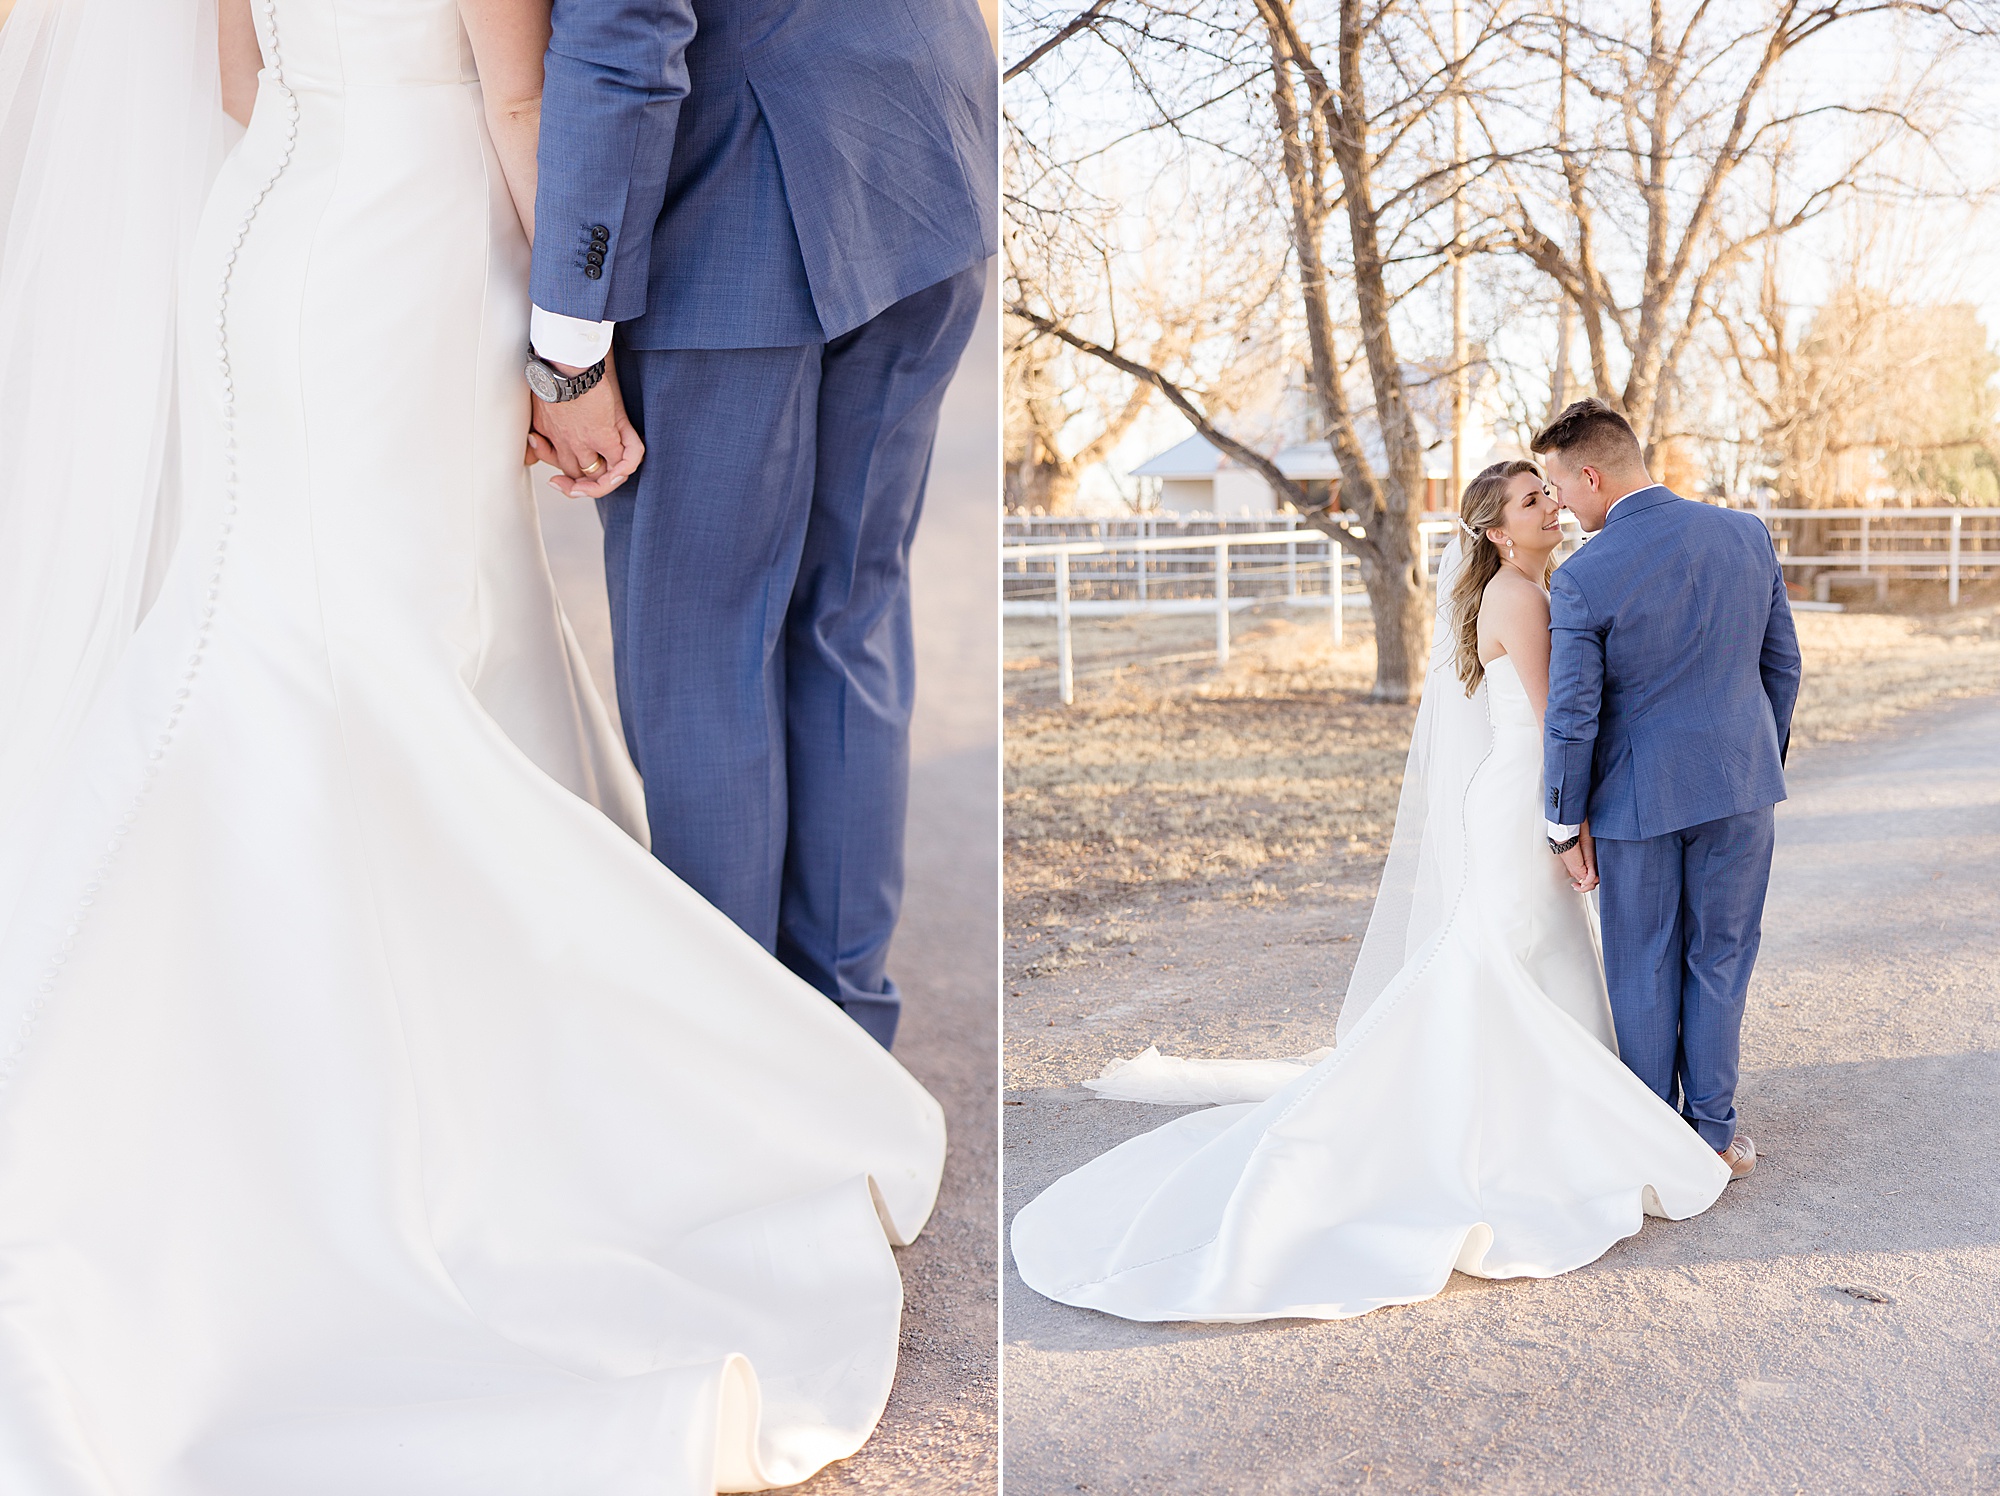 newlyweds hold hands and kiss in driveway during wedding portraits